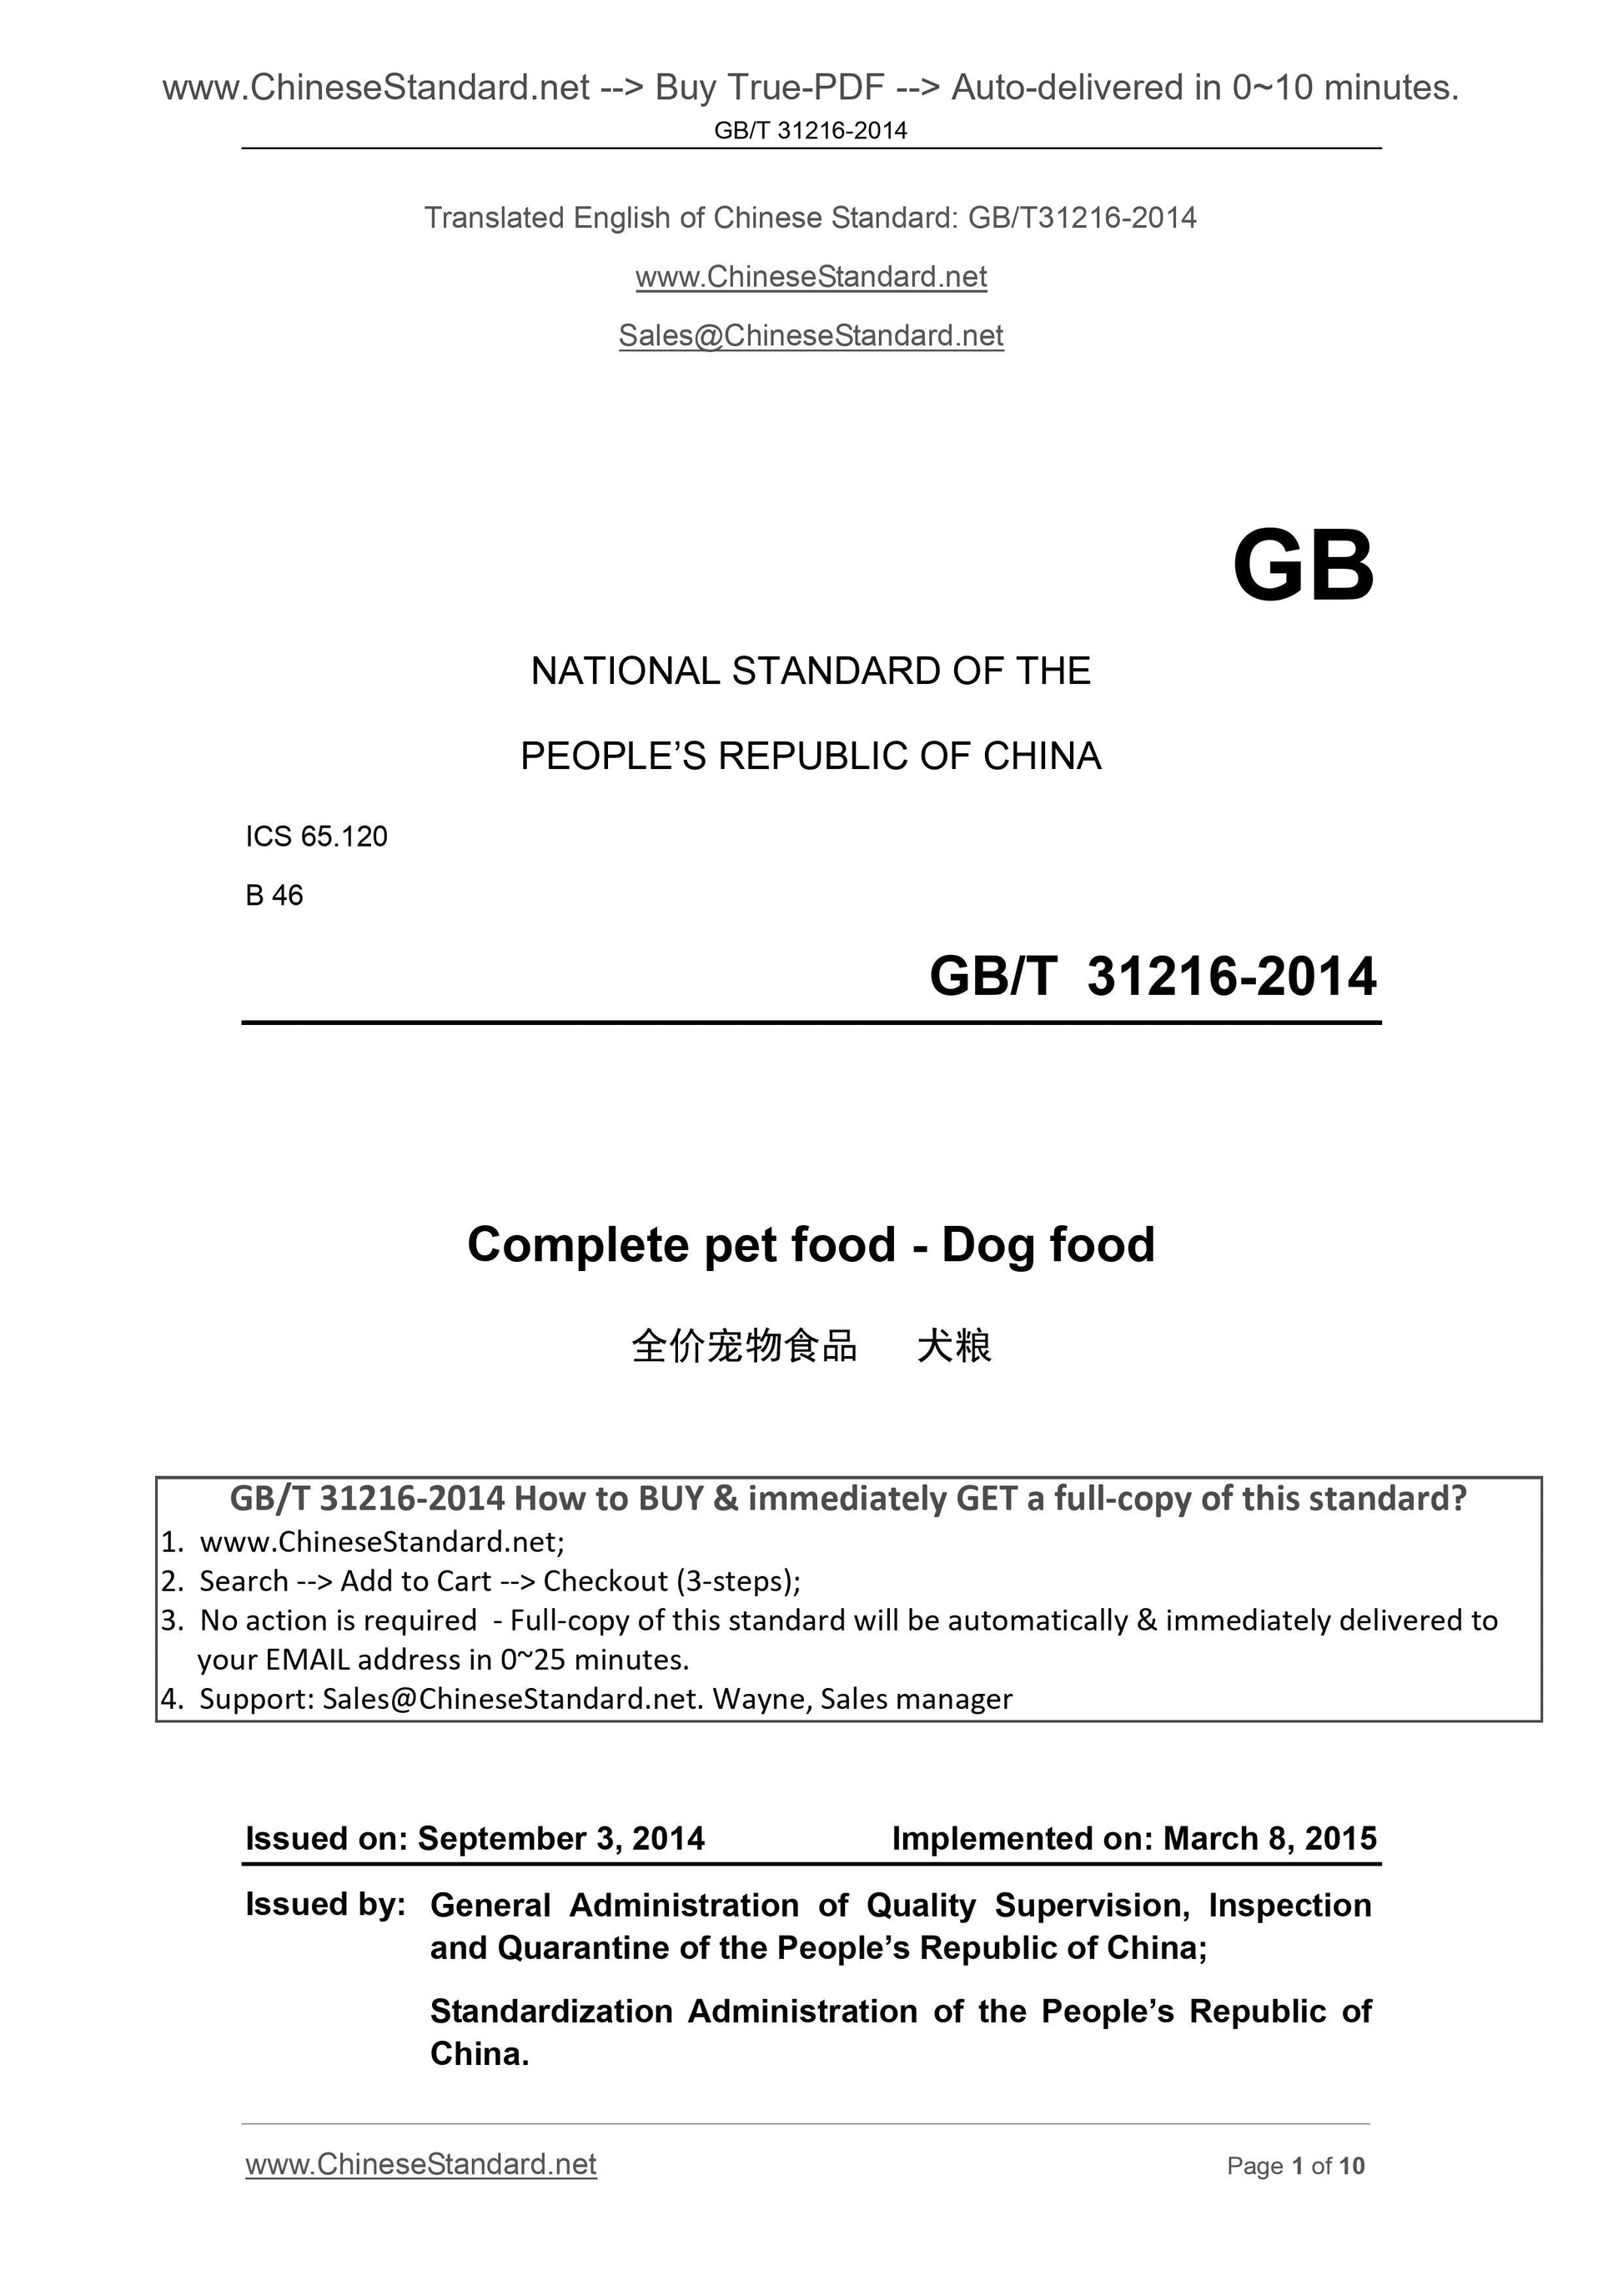 GB/T 31216-2014 Page 1